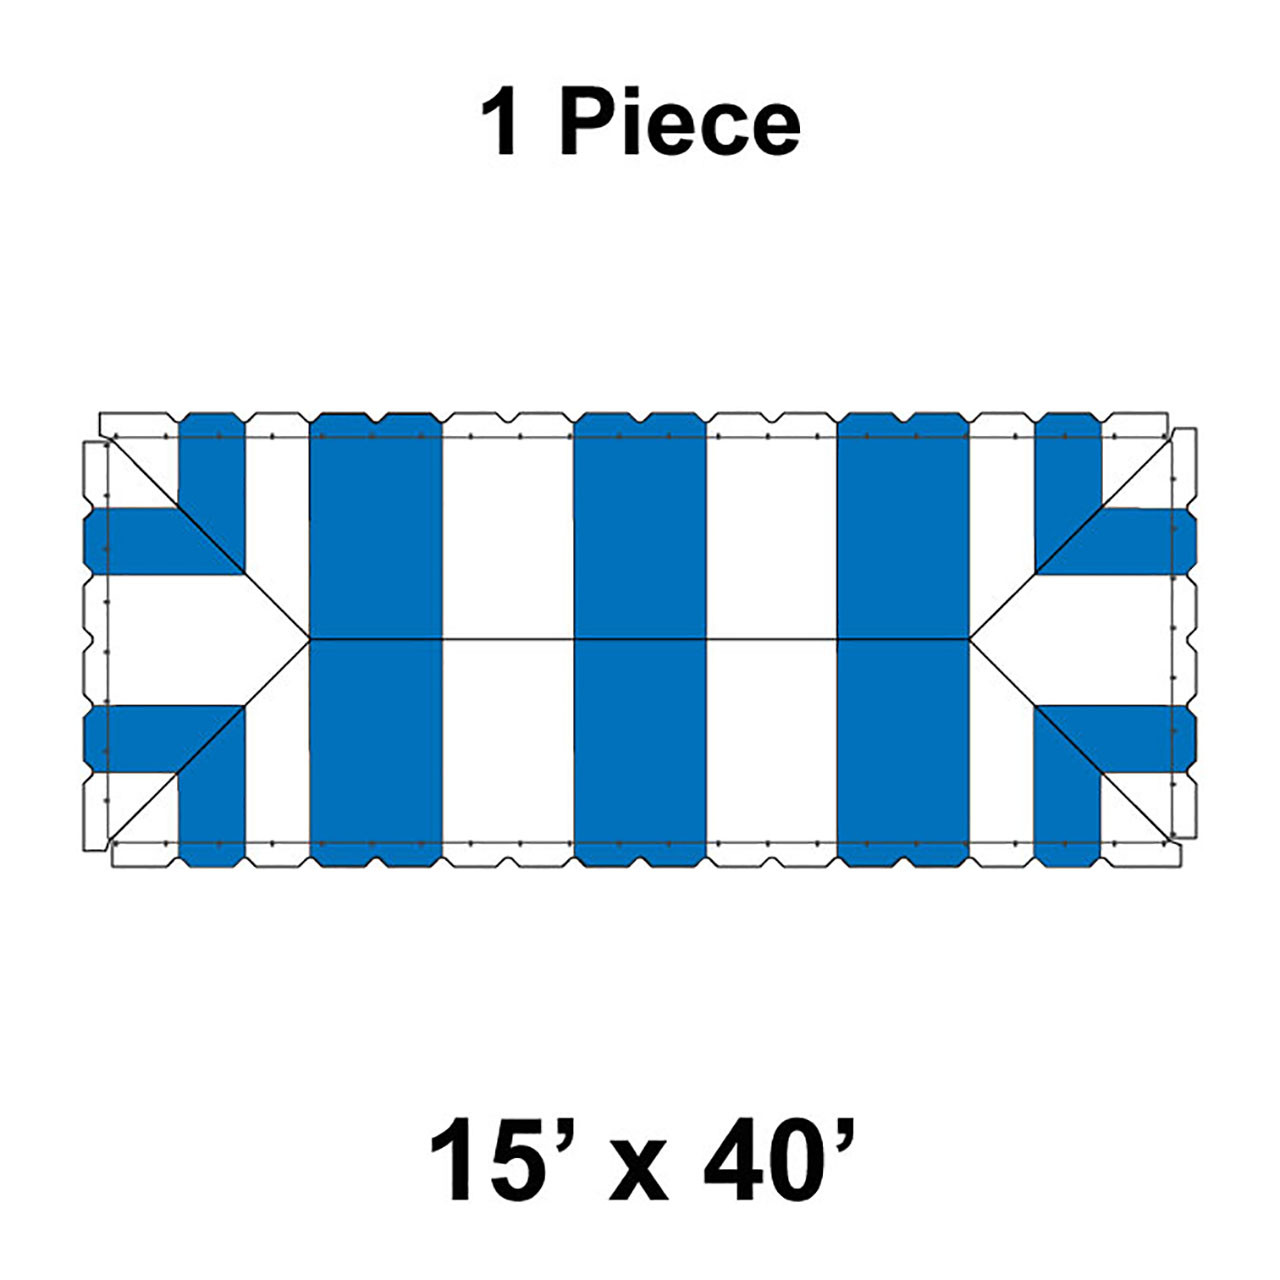 15' x 40' Classic Frame Tent, 1 Piece, 16 oz. Ratchet Top, White and Blue